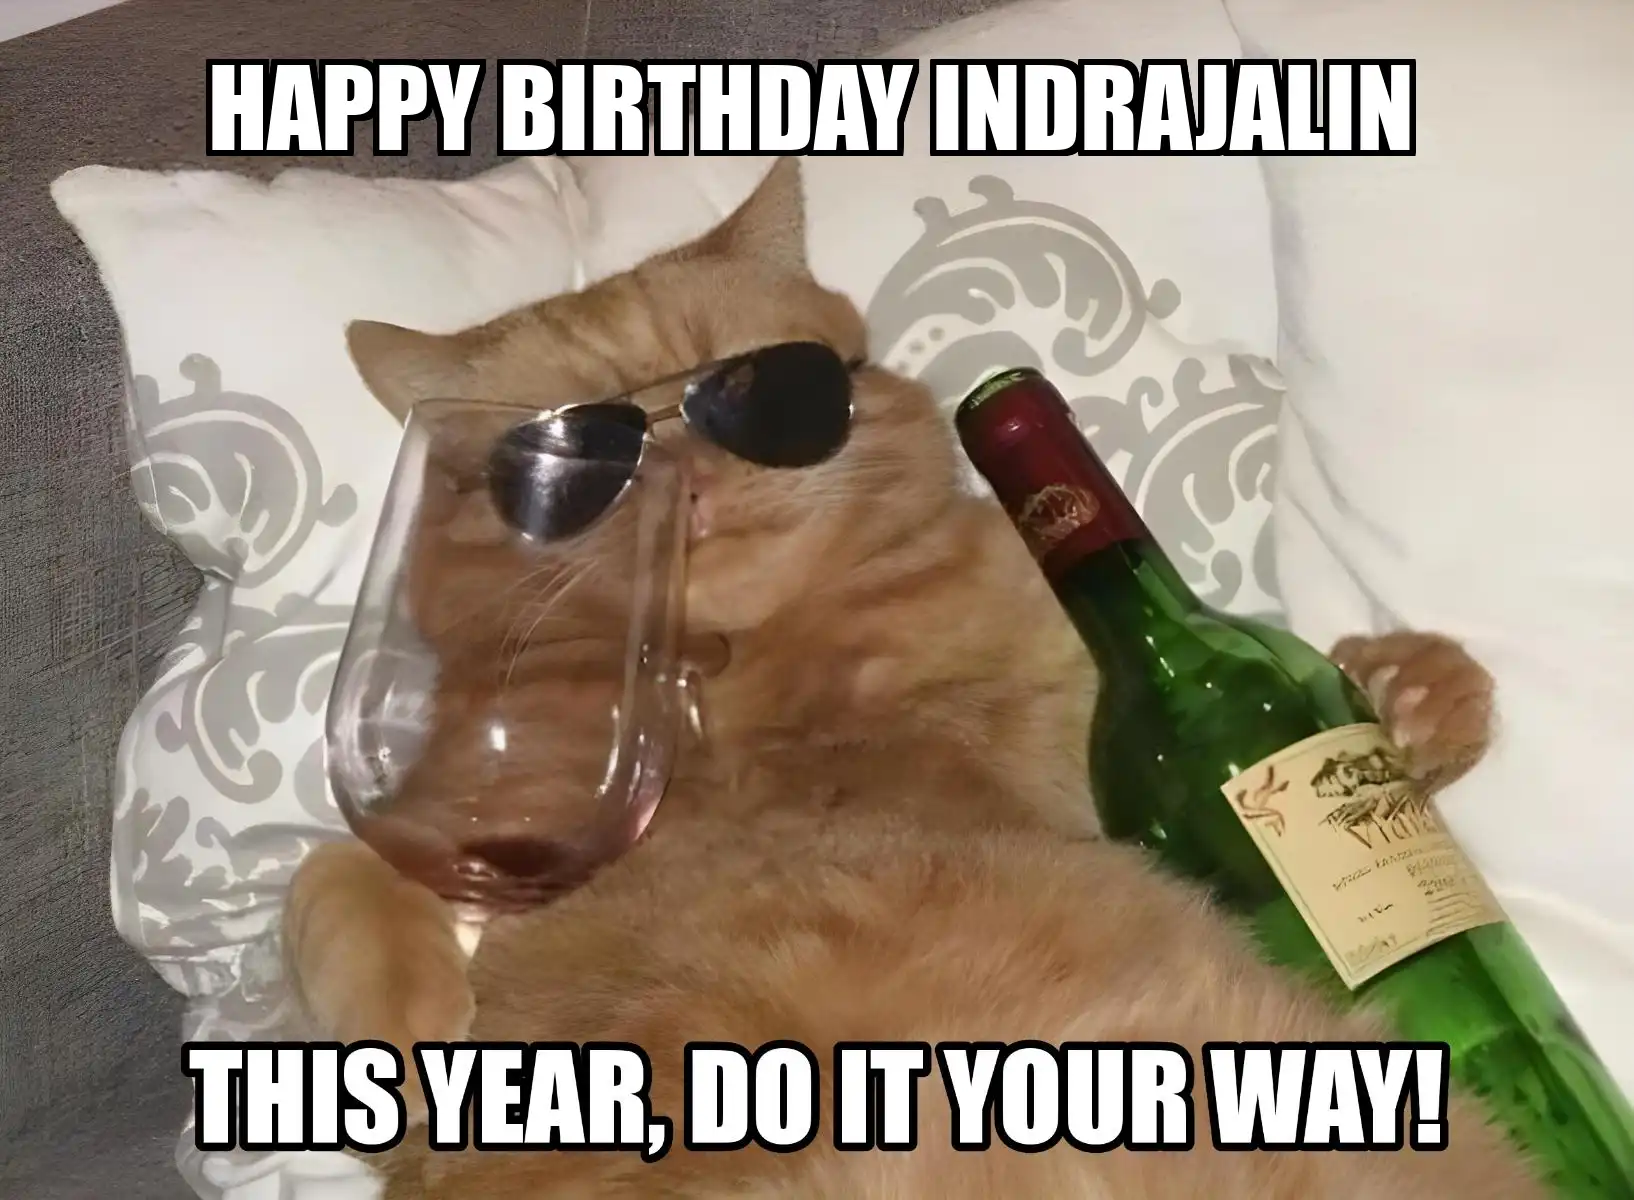 Happy Birthday Indrajalin This Year Do It Your Way Meme